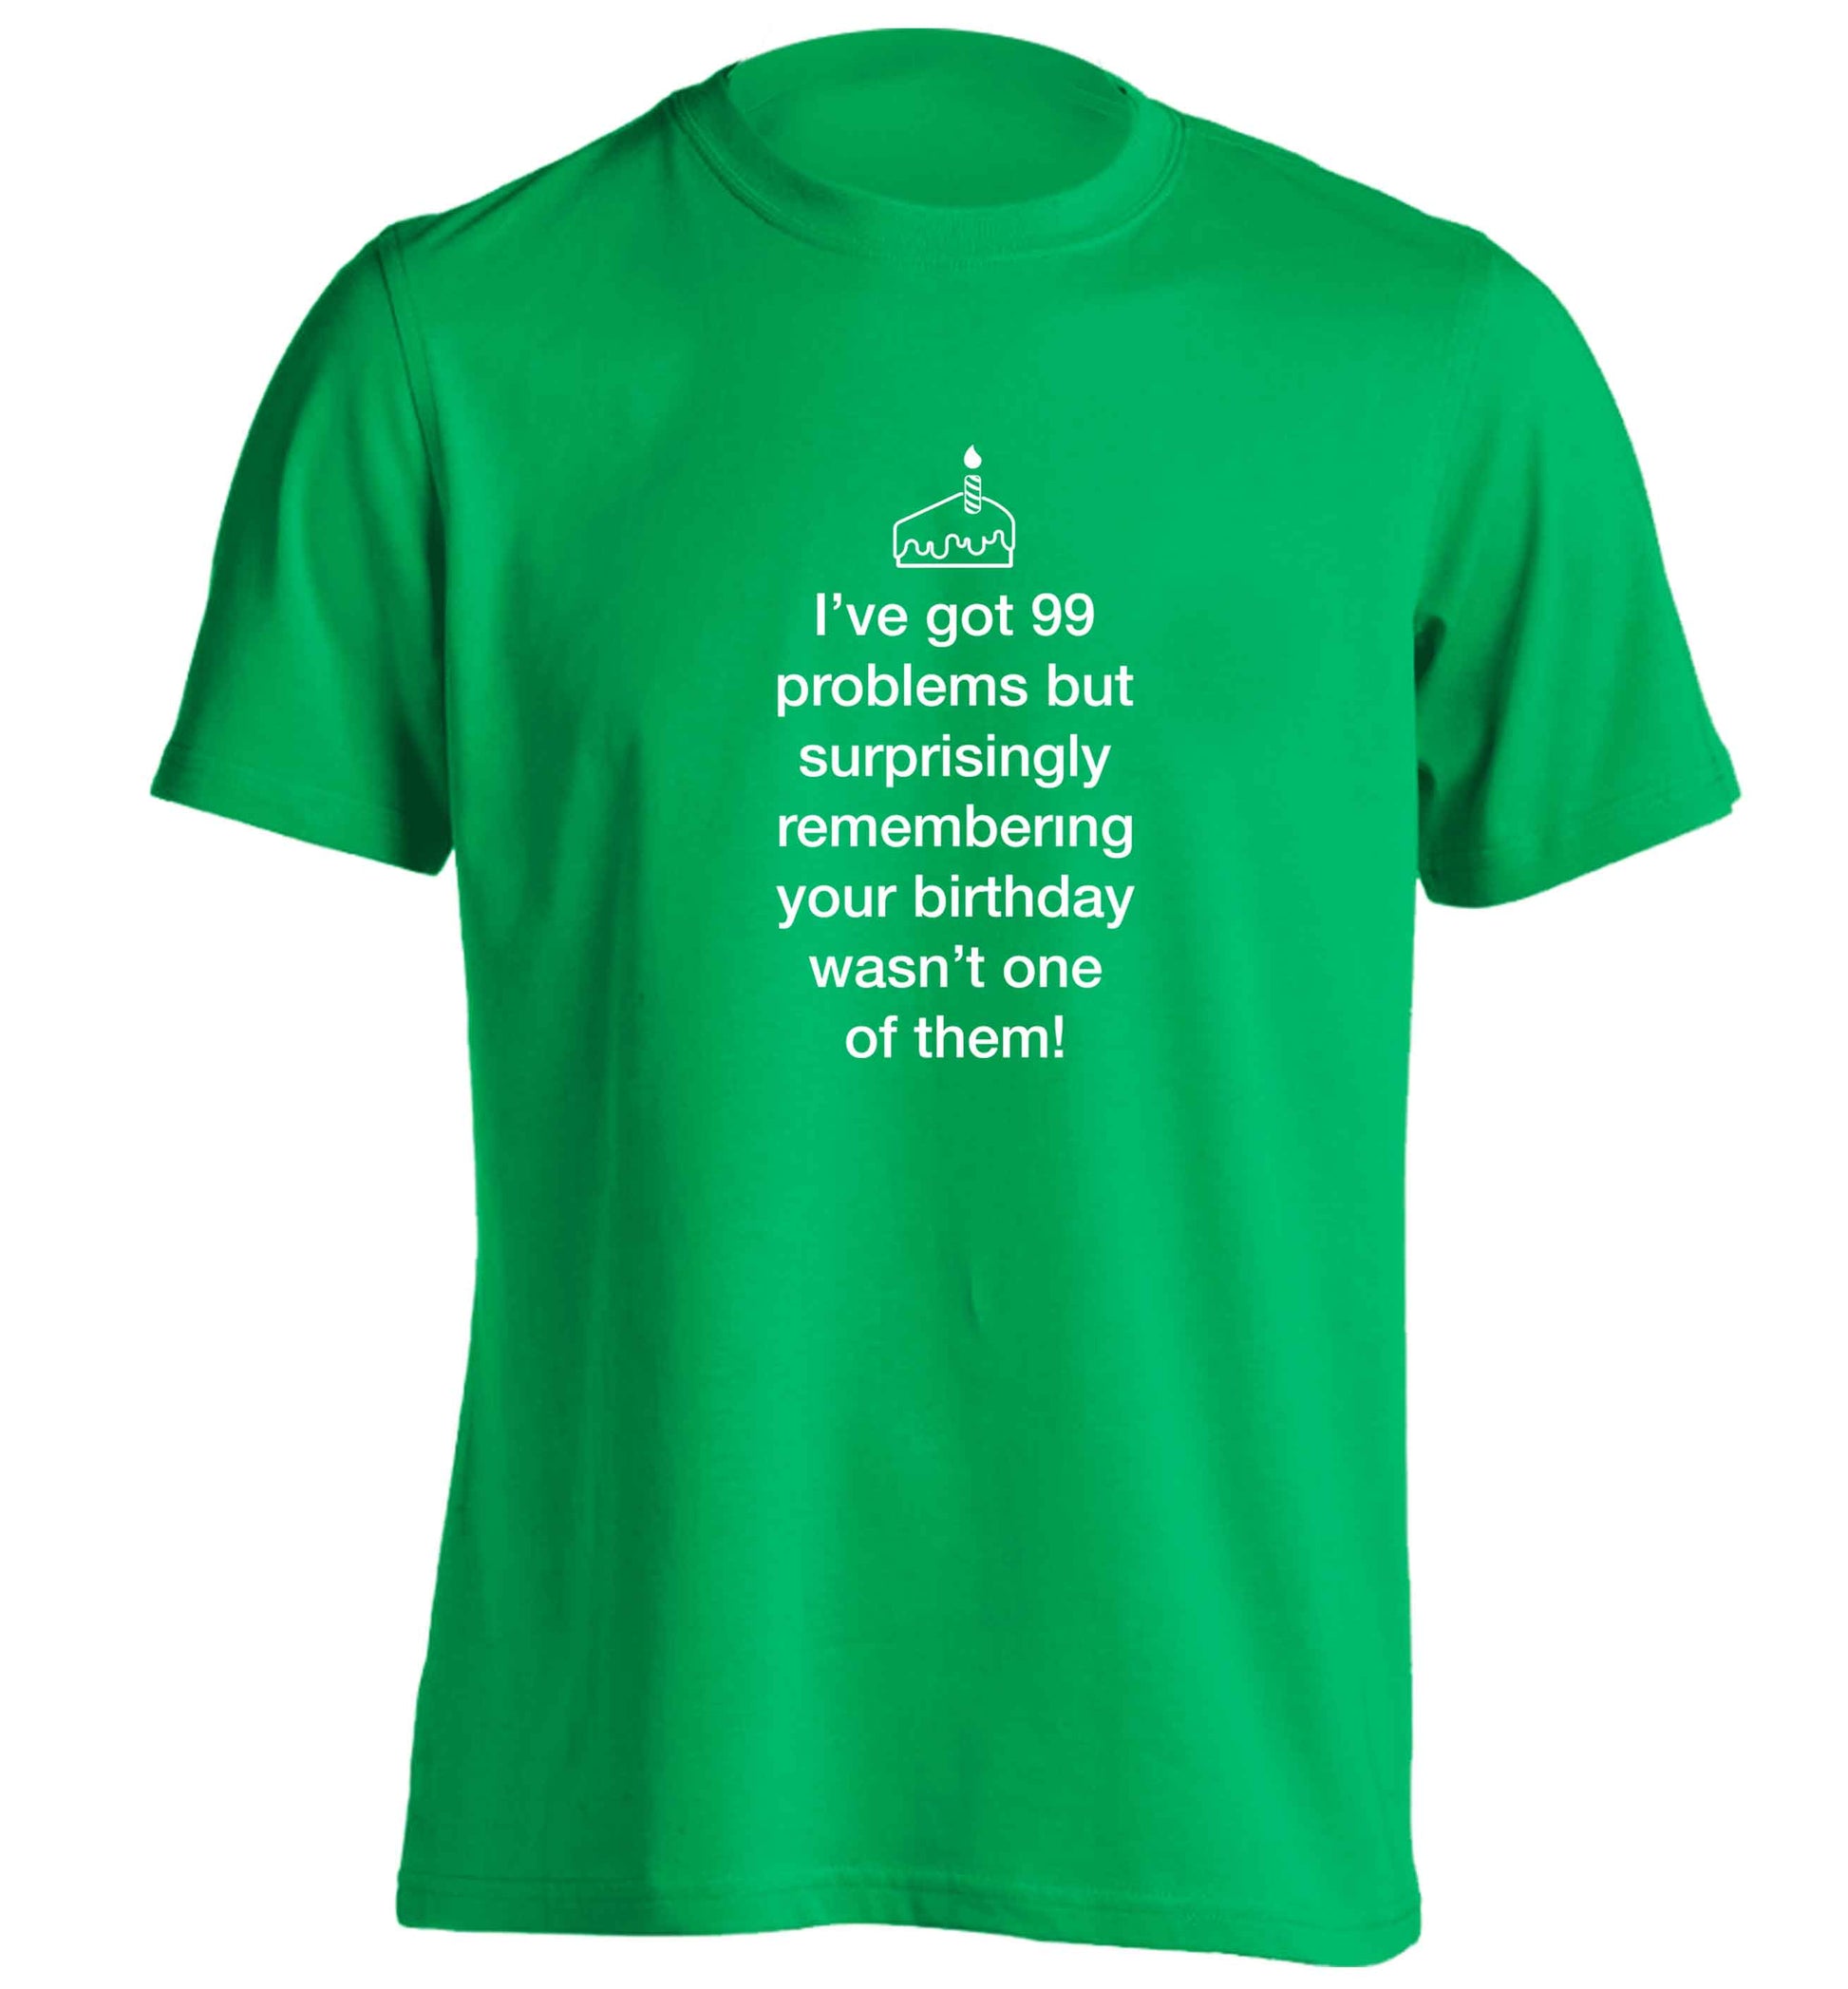 I've got 99 problems but surprisingly remembering your birthday wasn't one of them! adults unisex green Tshirt 2XL